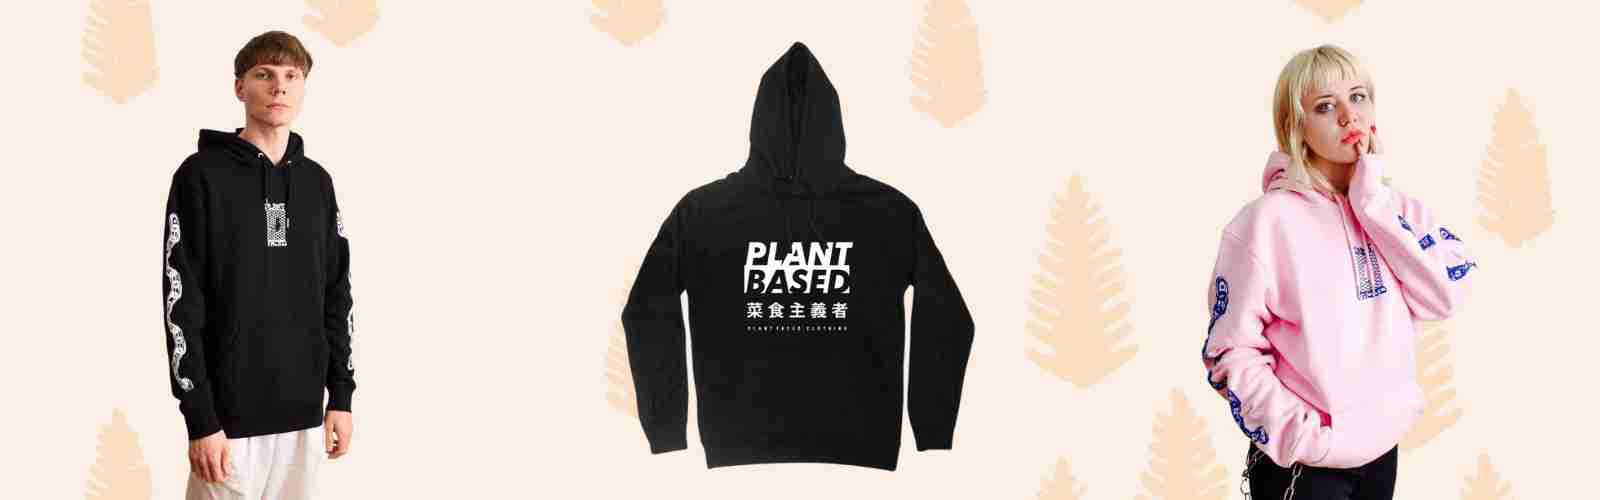 Plantfaced Reduce Fashion Waste with Clothes Made from Recycled Materials: Brands and Tips